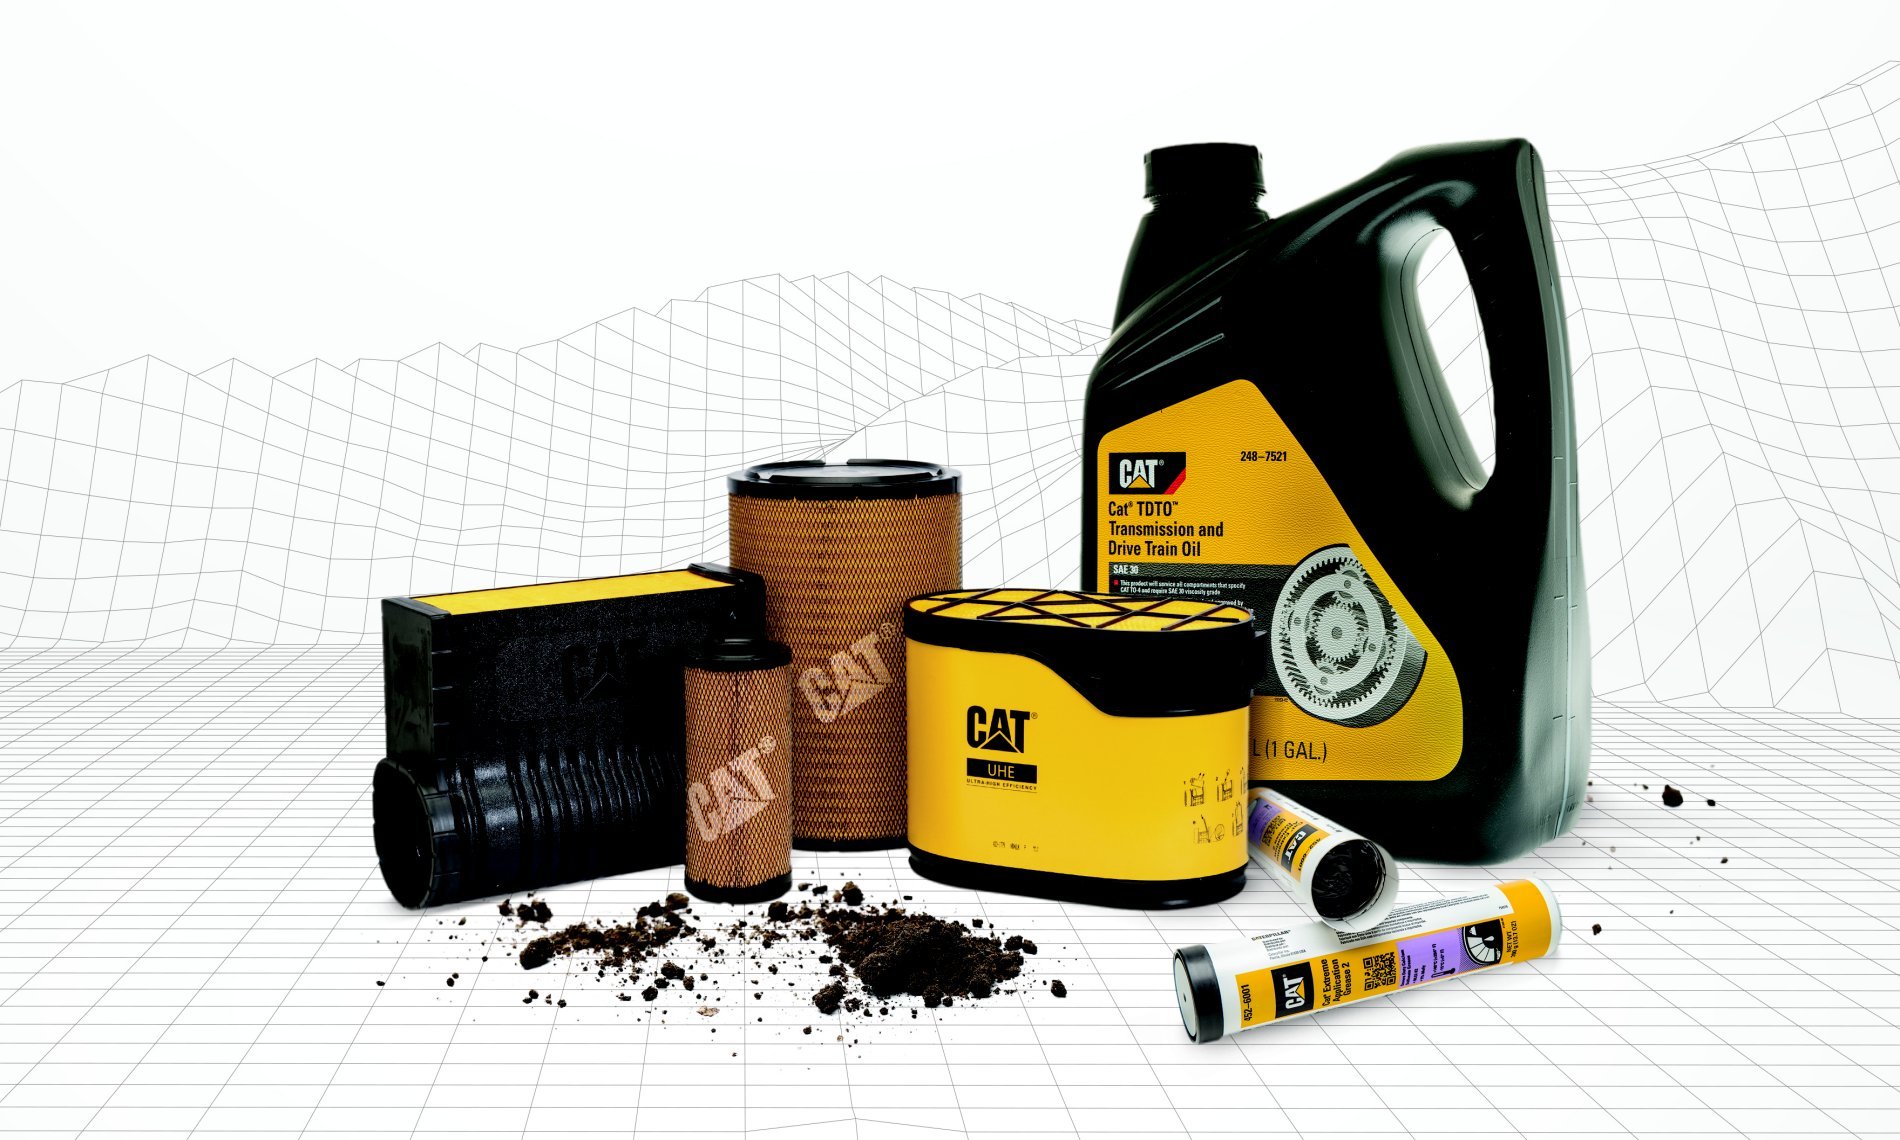 Caterpillar  Cat® Products, Parts, Services, Technology and Merchandise